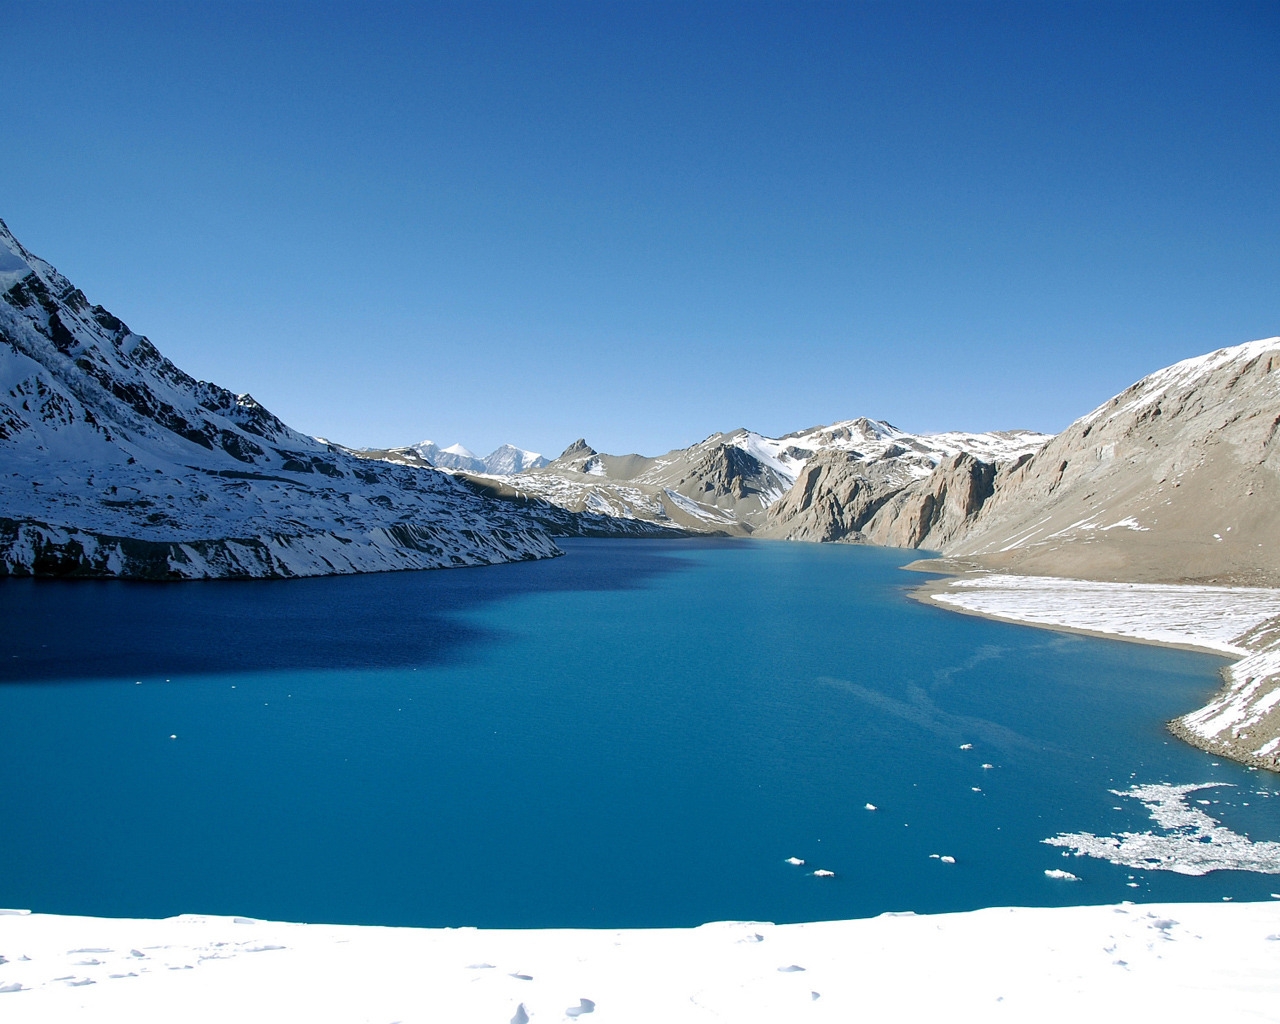 Tilicho Lake View for 1280 x 1024 resolution